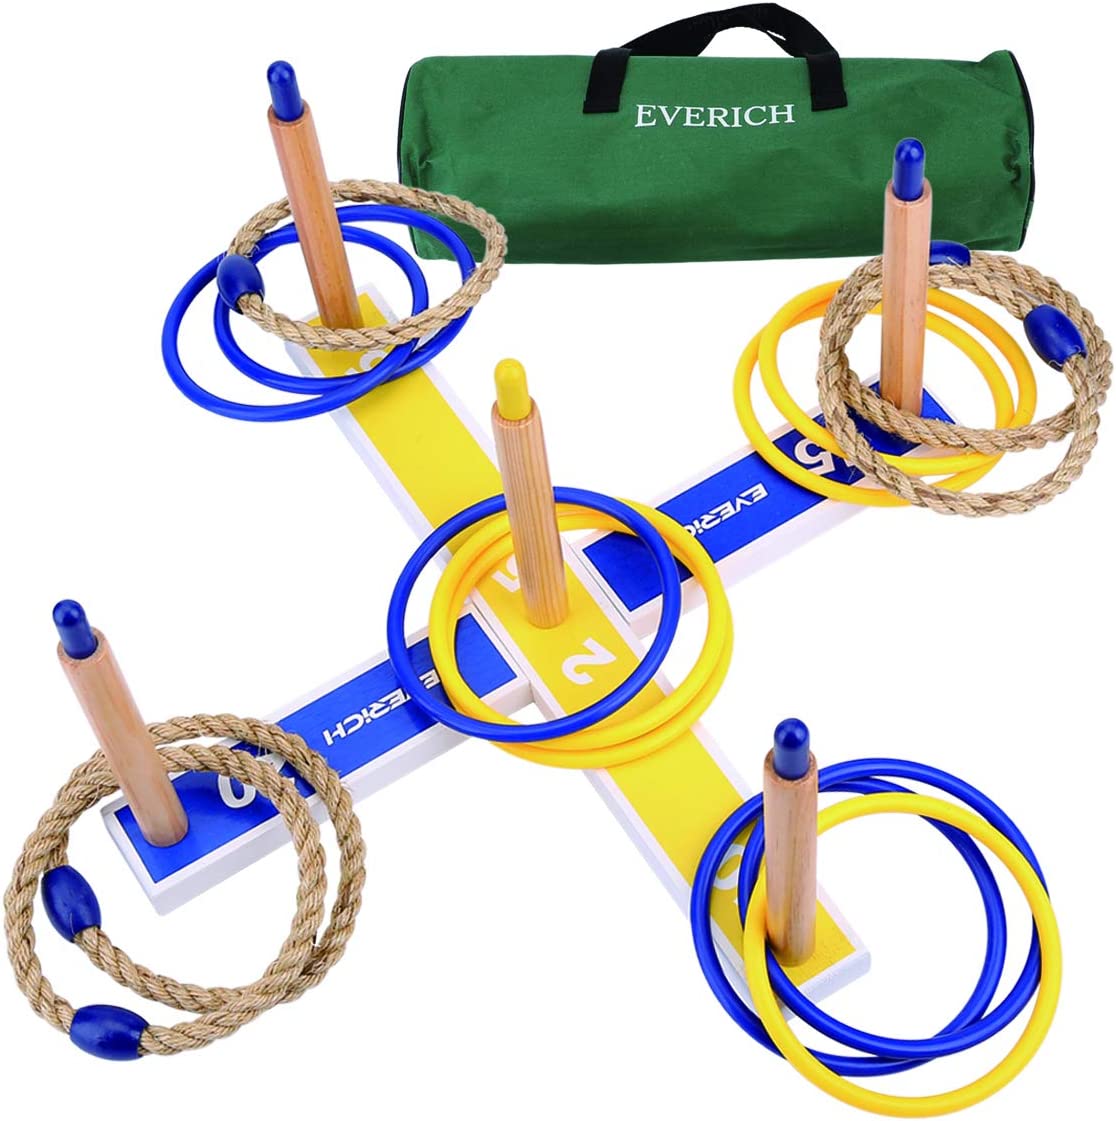 Ring Toss Game Rental for Family Fun